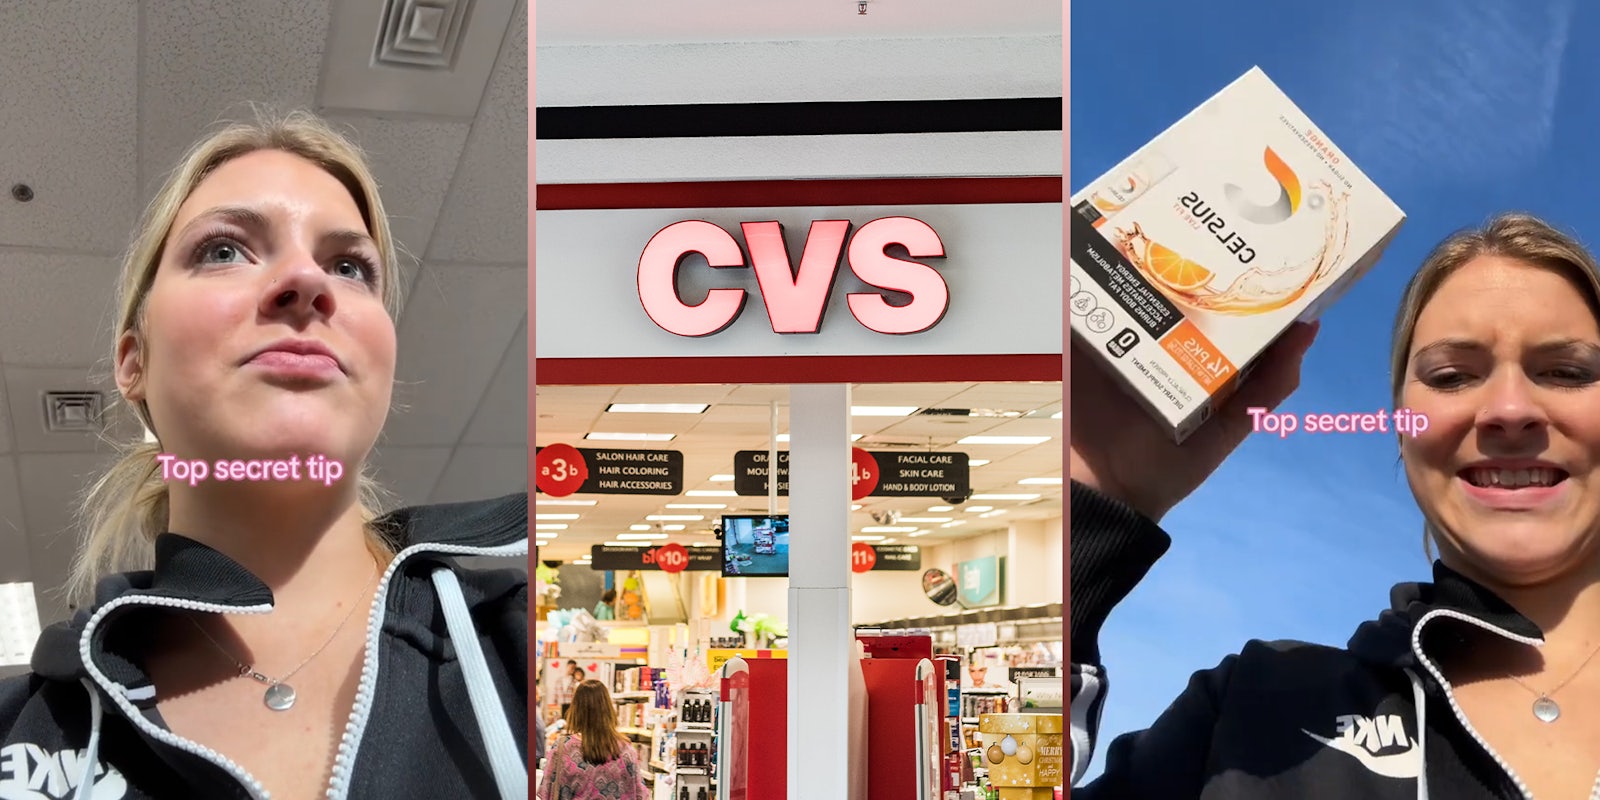 CVS customer shows trick to finding expired items in the store to unlock deal